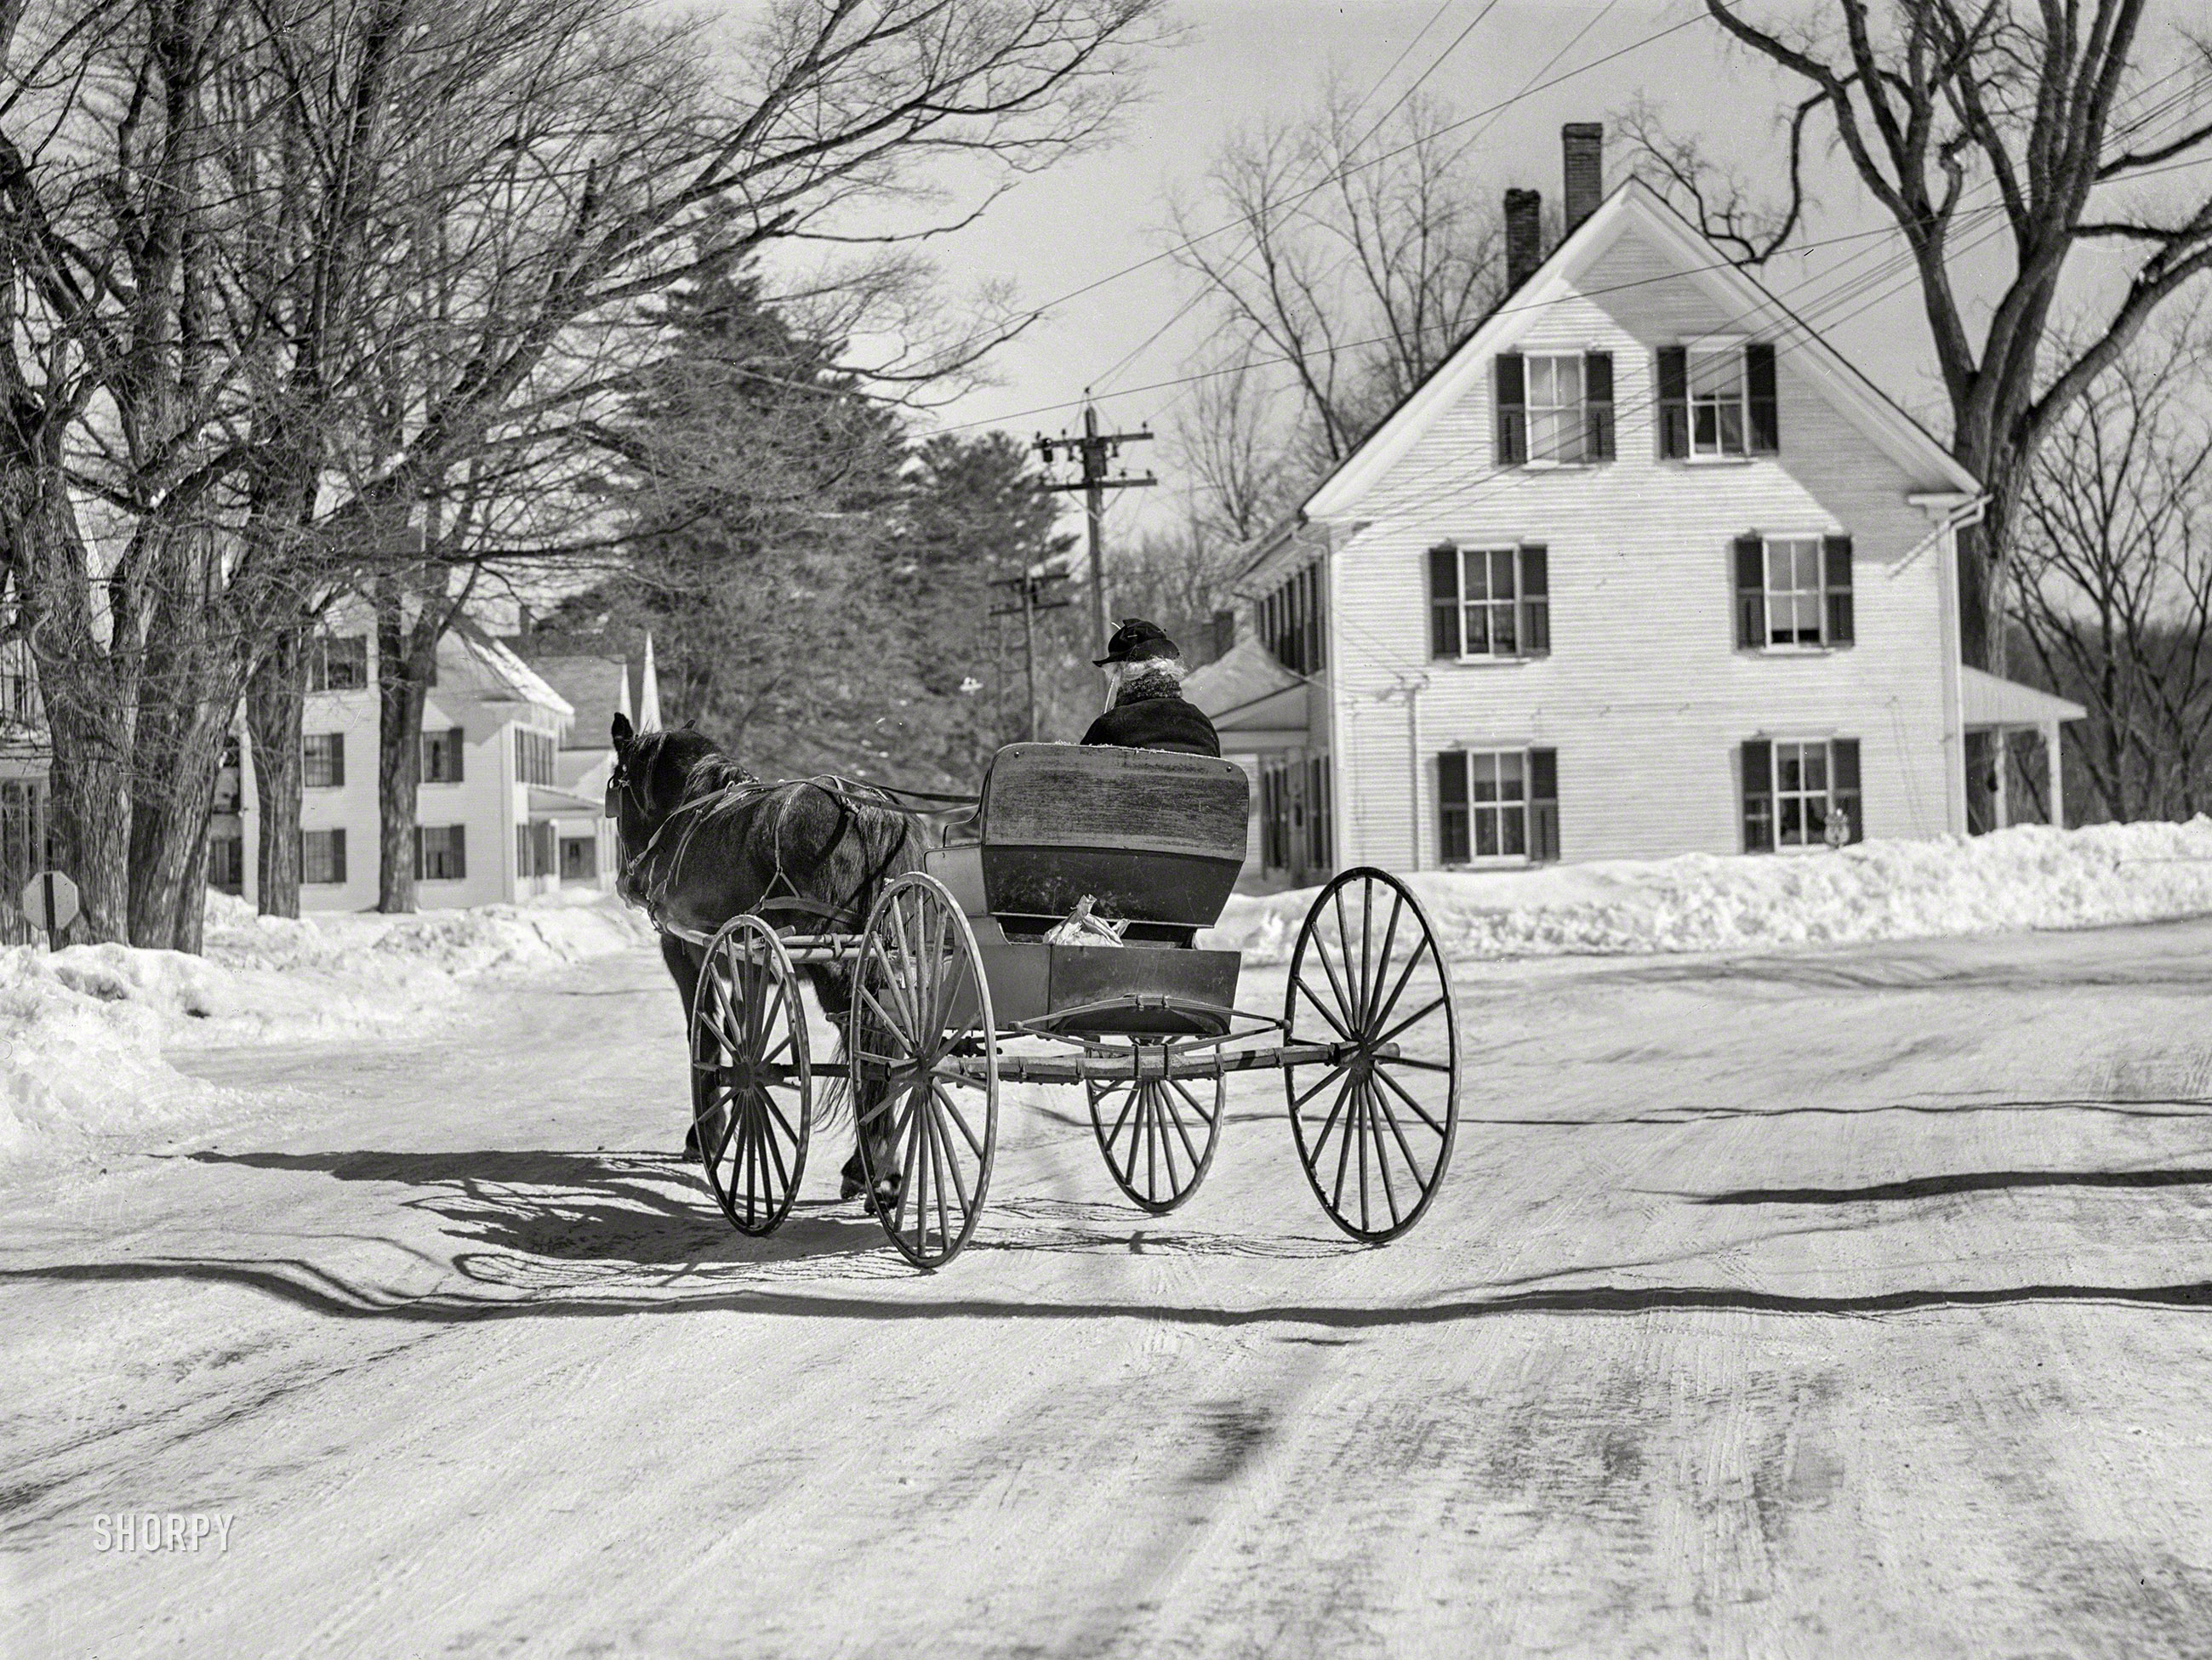 March 1940. "Going to town. Woodstock, Vermont." Medium format acetate negative by Marion Post Wolcott for the Farm Security Administration. View full size.